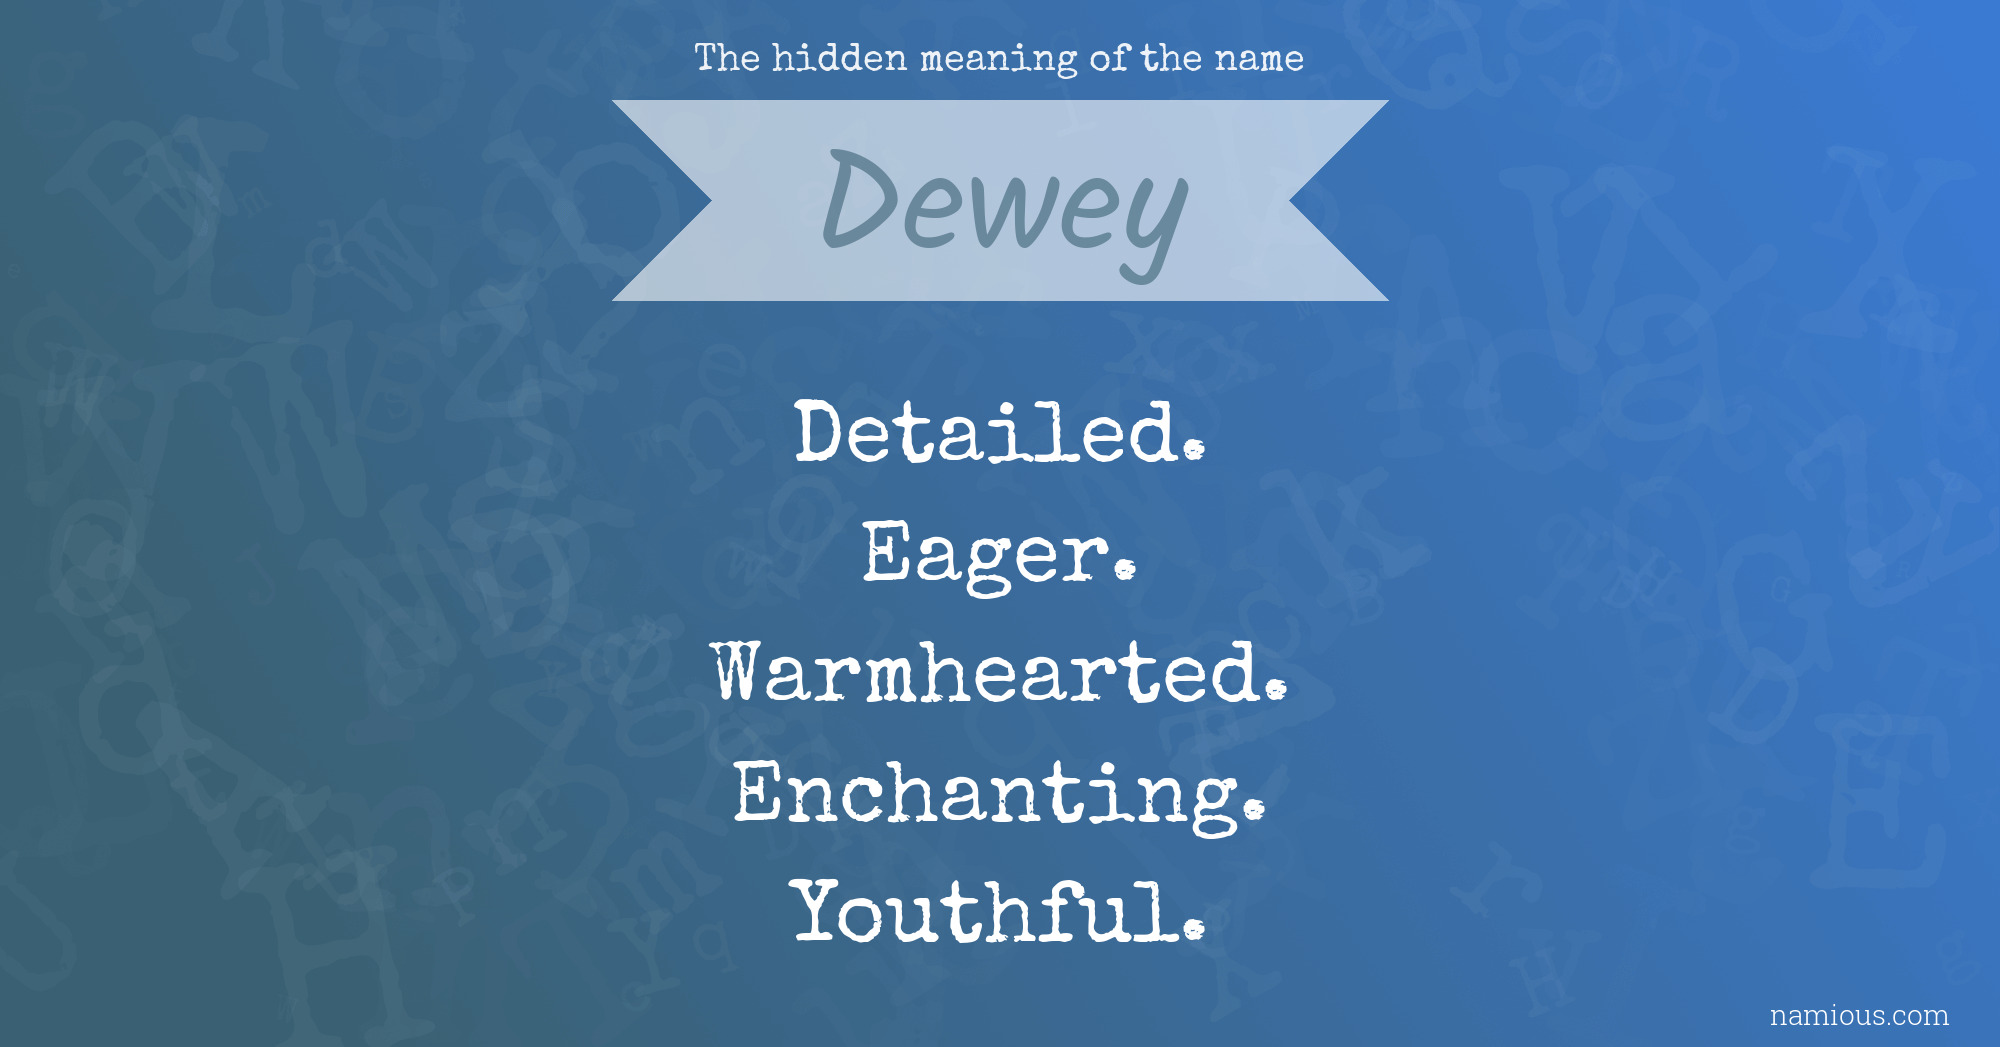 The hidden meaning of the name Dewey